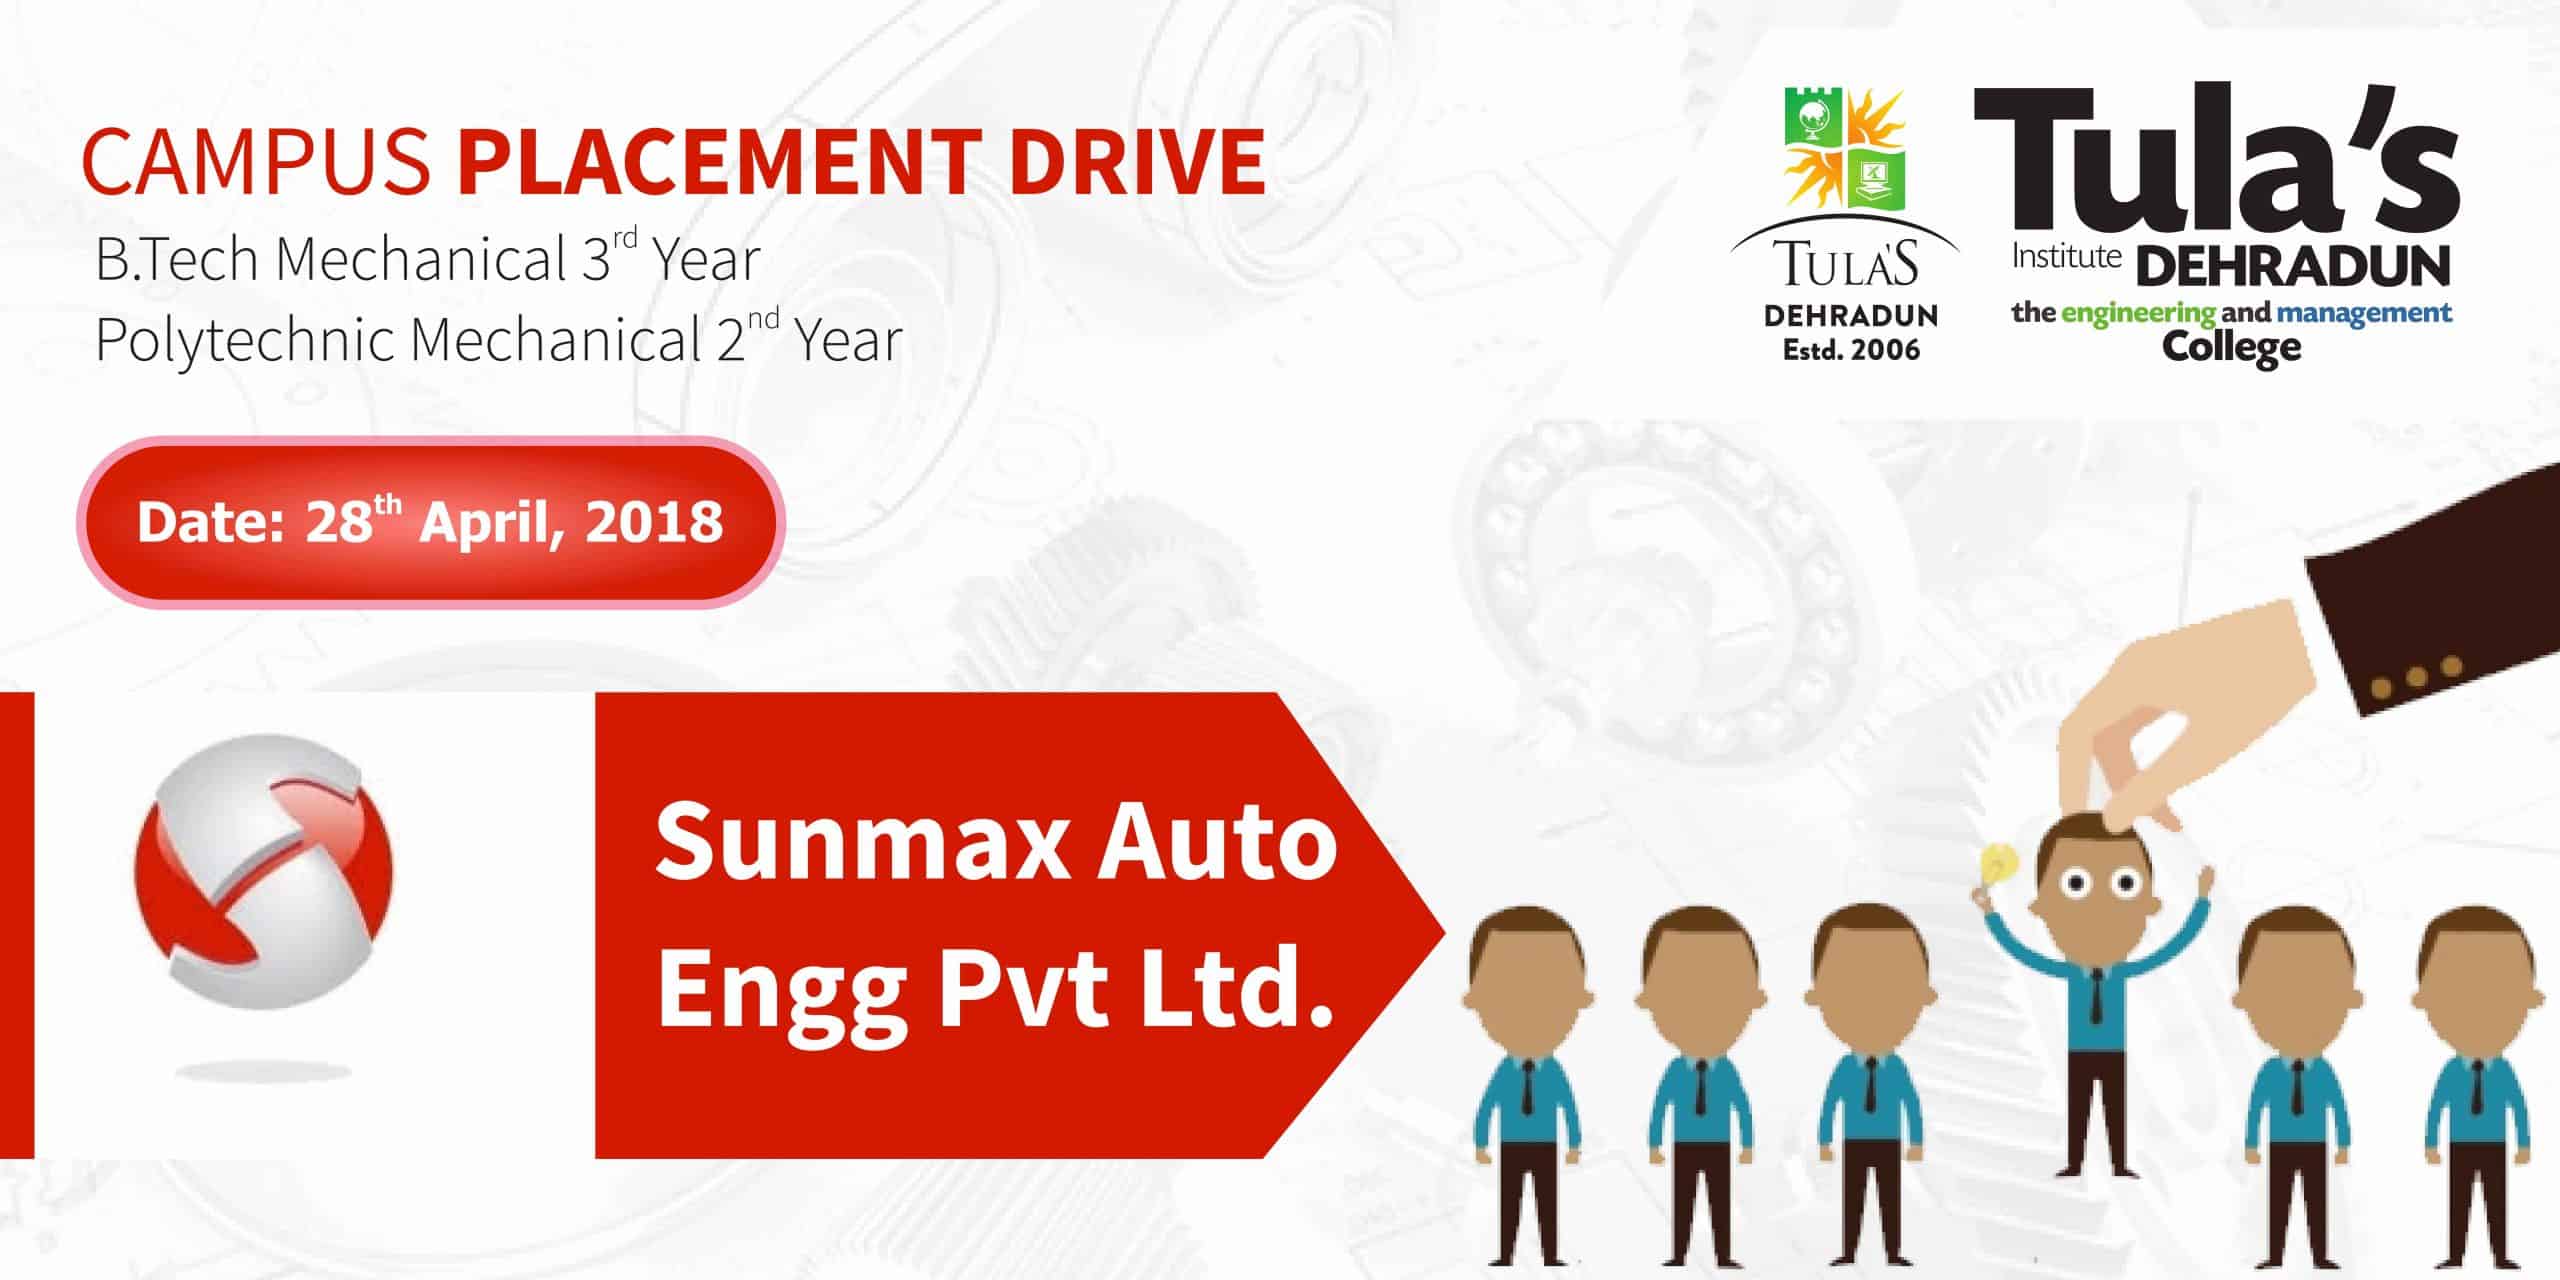 You are currently viewing Campus Drive of Sunmax Auto Pvt Ltd